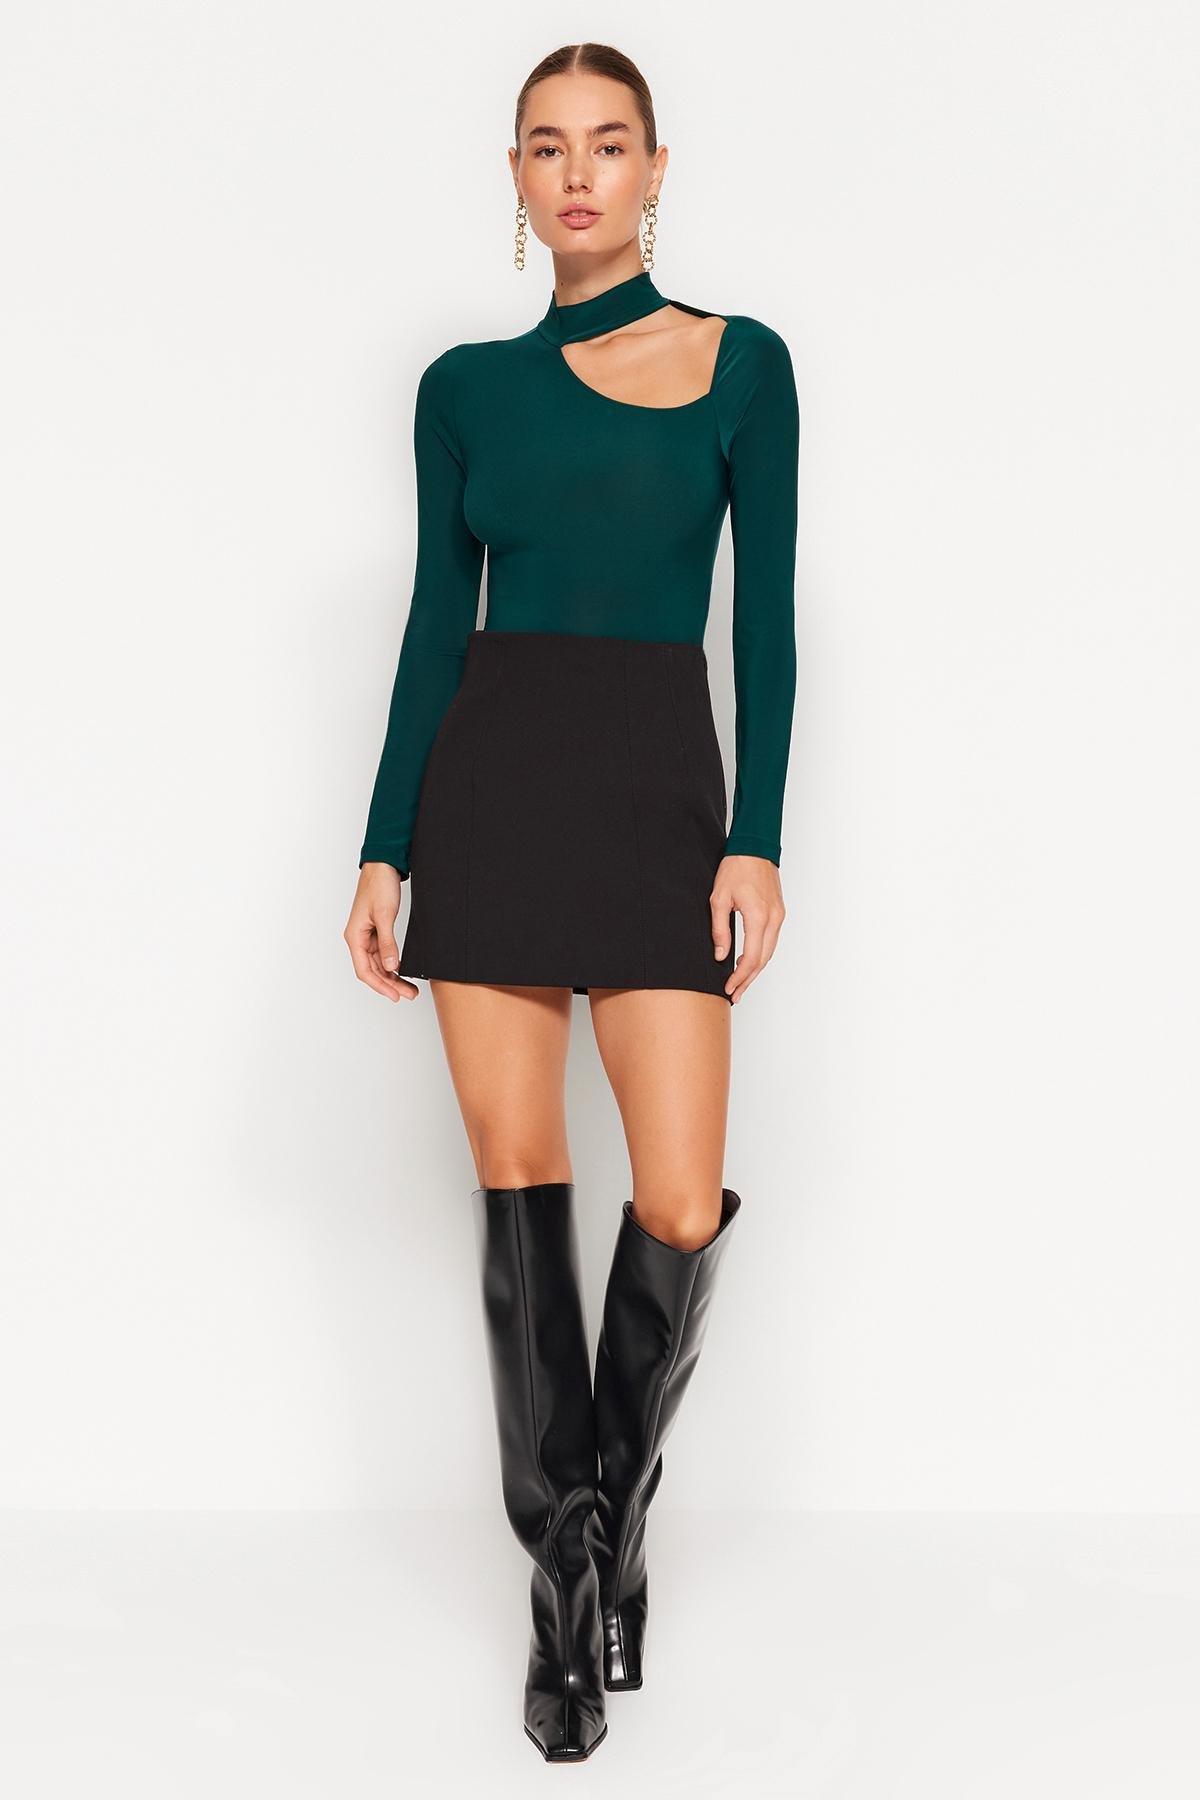 Trendyol - Green Cut-Out Choker Collar Knitted Body